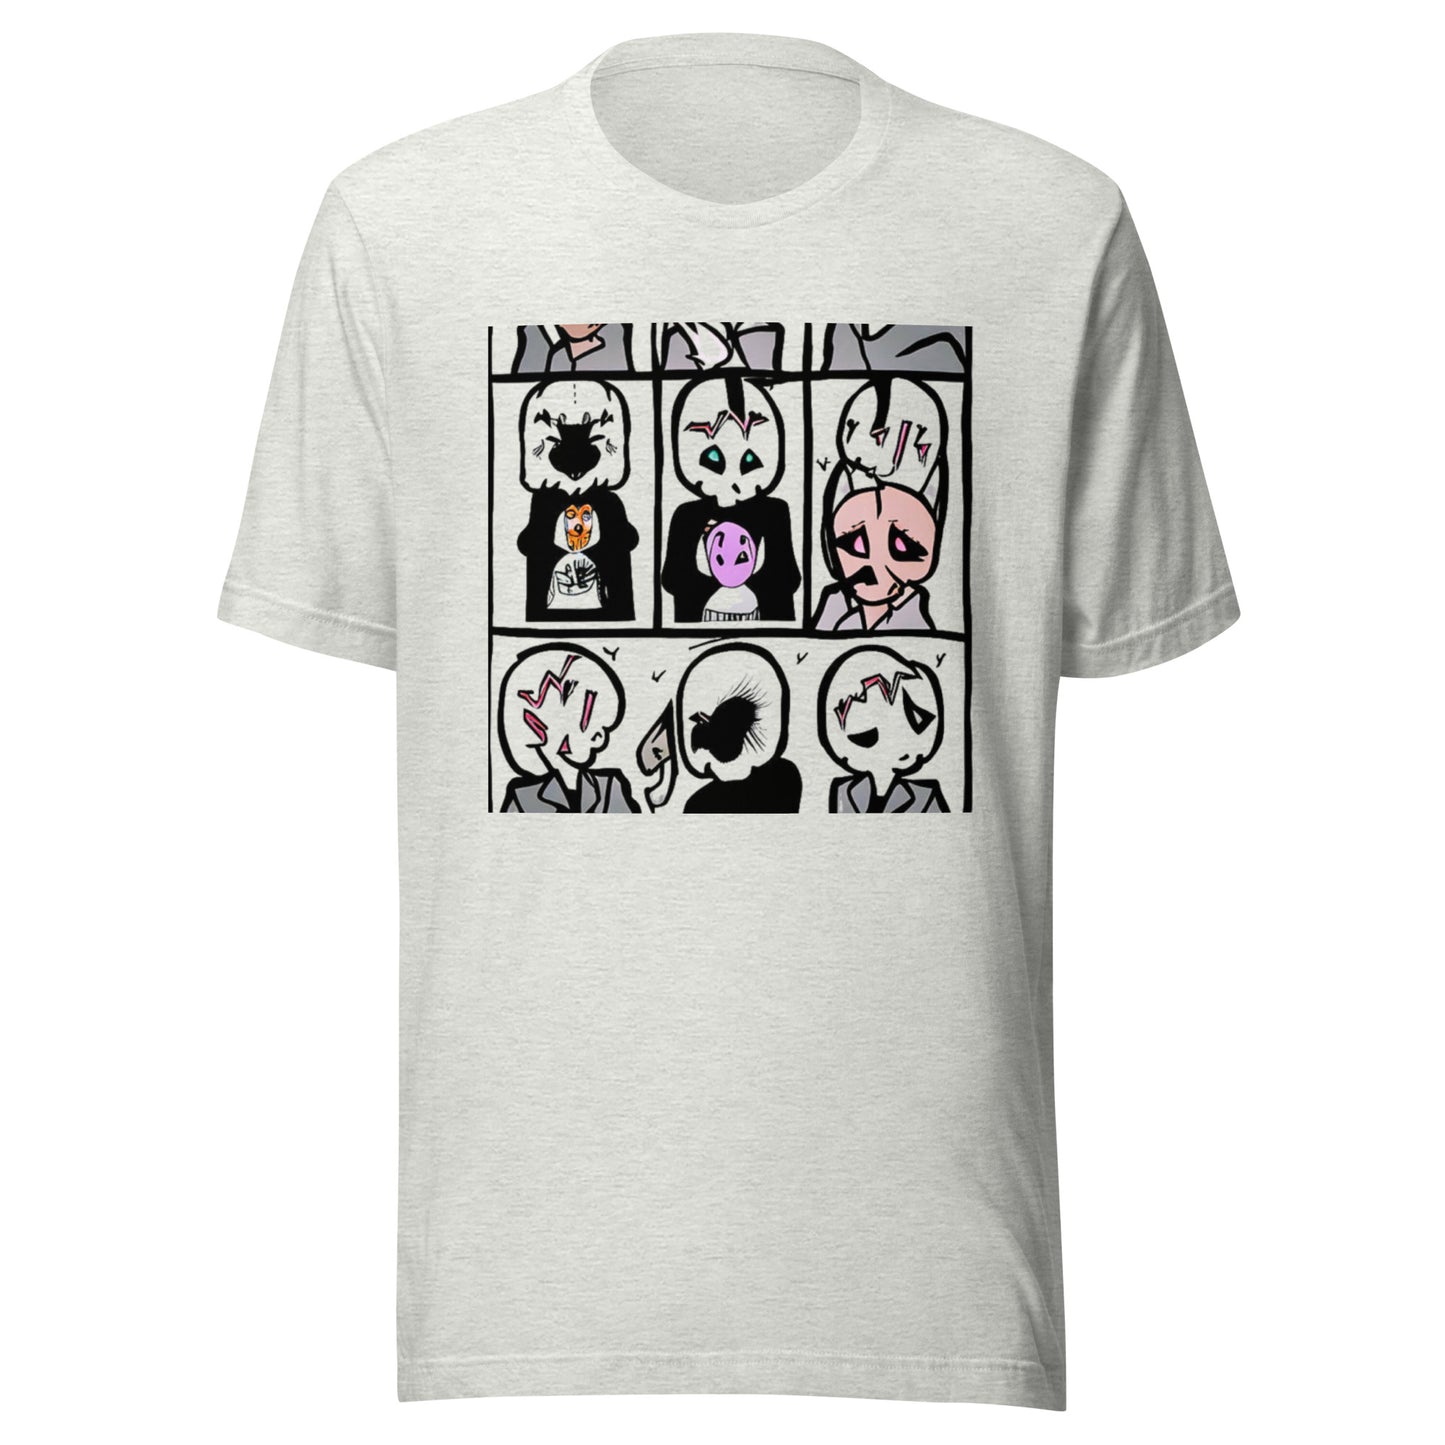 Comedy of Pan - Unisex t-shirt